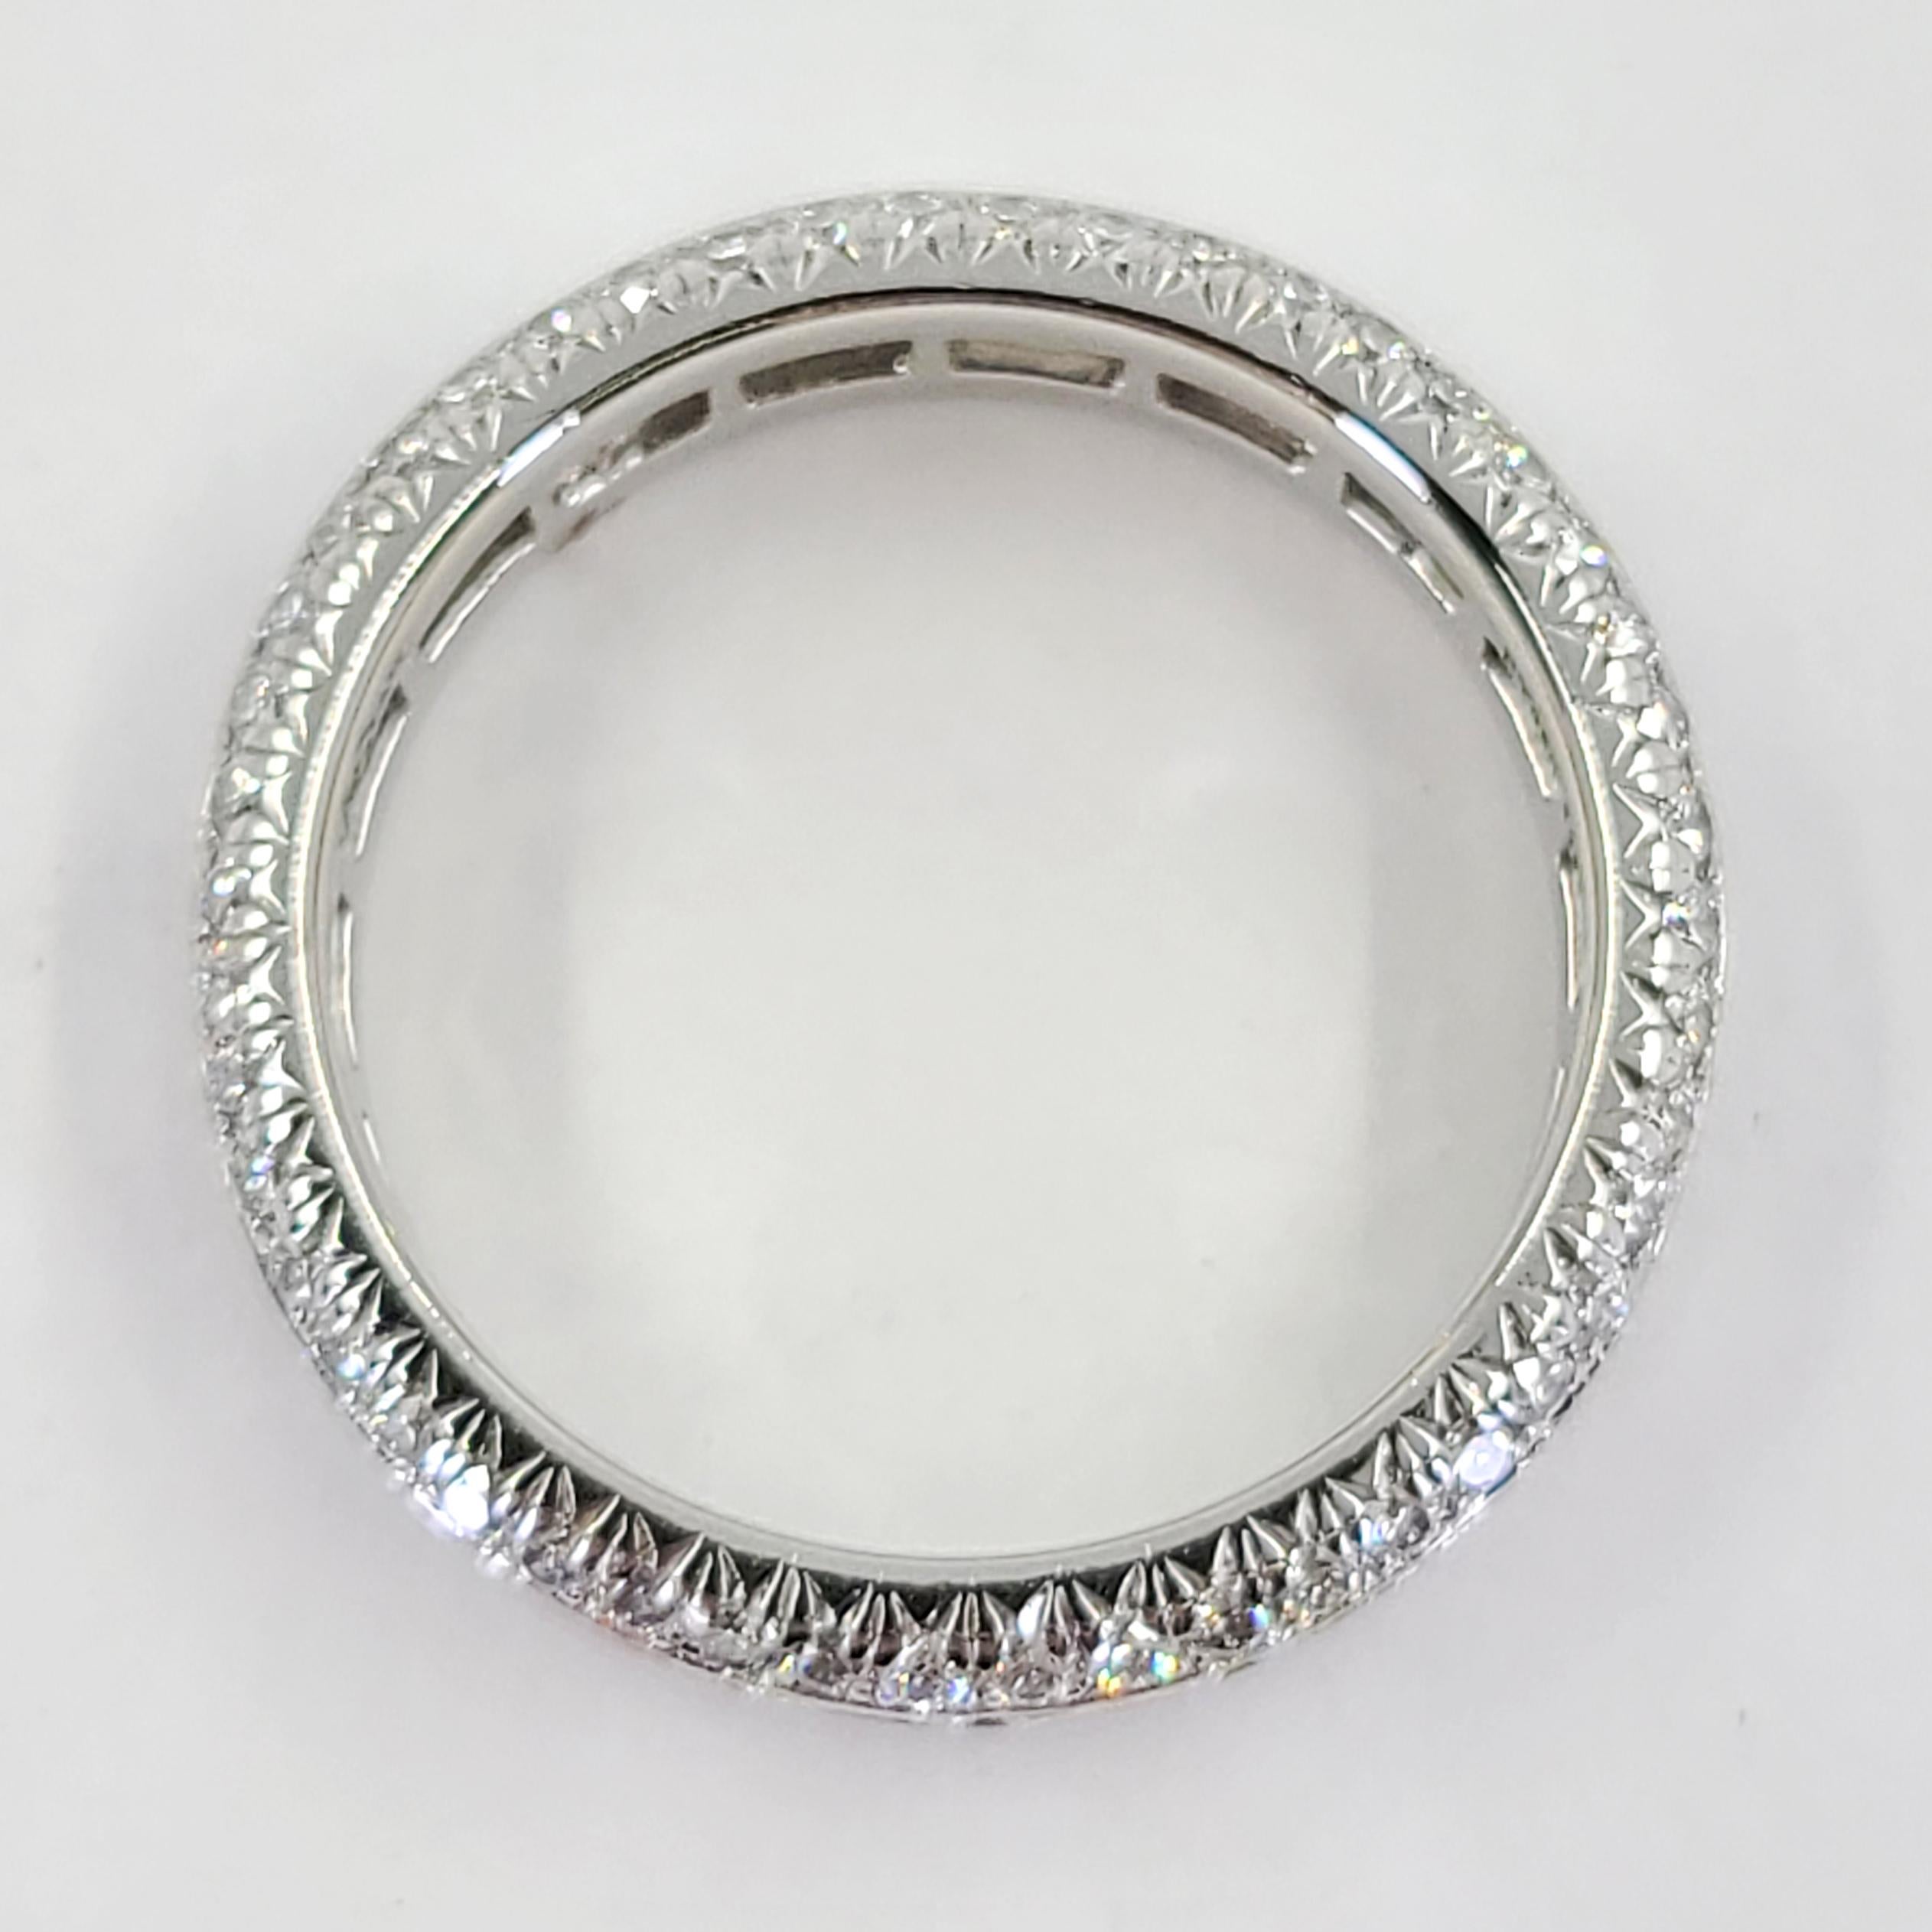 JB Star Platinum Emerald Cut Eternity Band In Good Condition For Sale In Coral Gables, FL